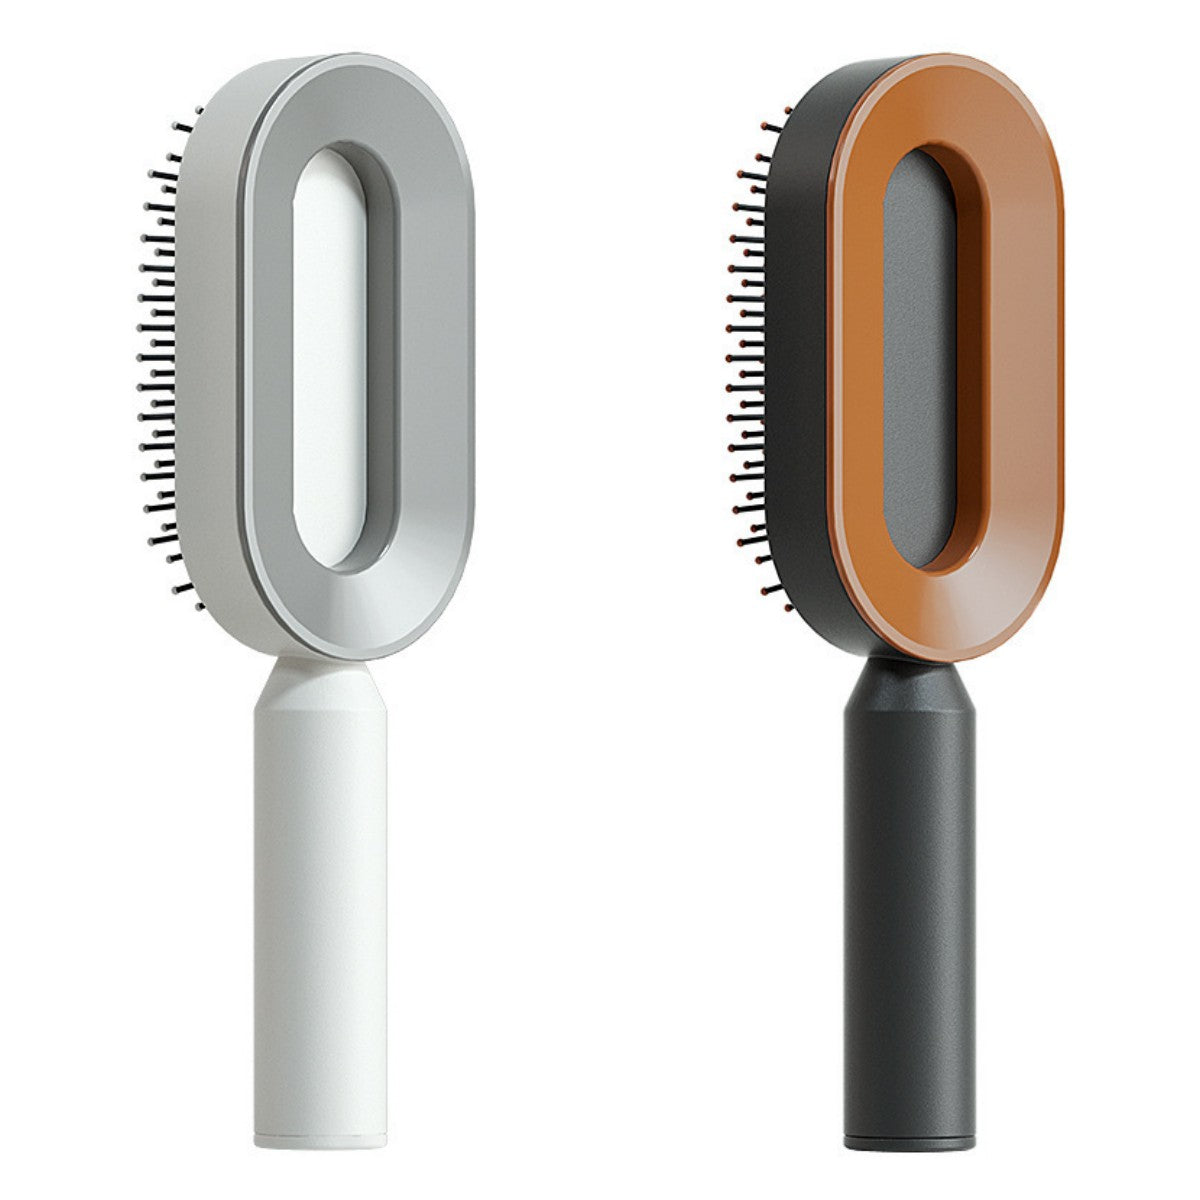 Self Cleaning Hair Brush* For Women One-key Cleaning Hair Loss Airbag Massage Scalp Comb Anti-Static Hairbrush